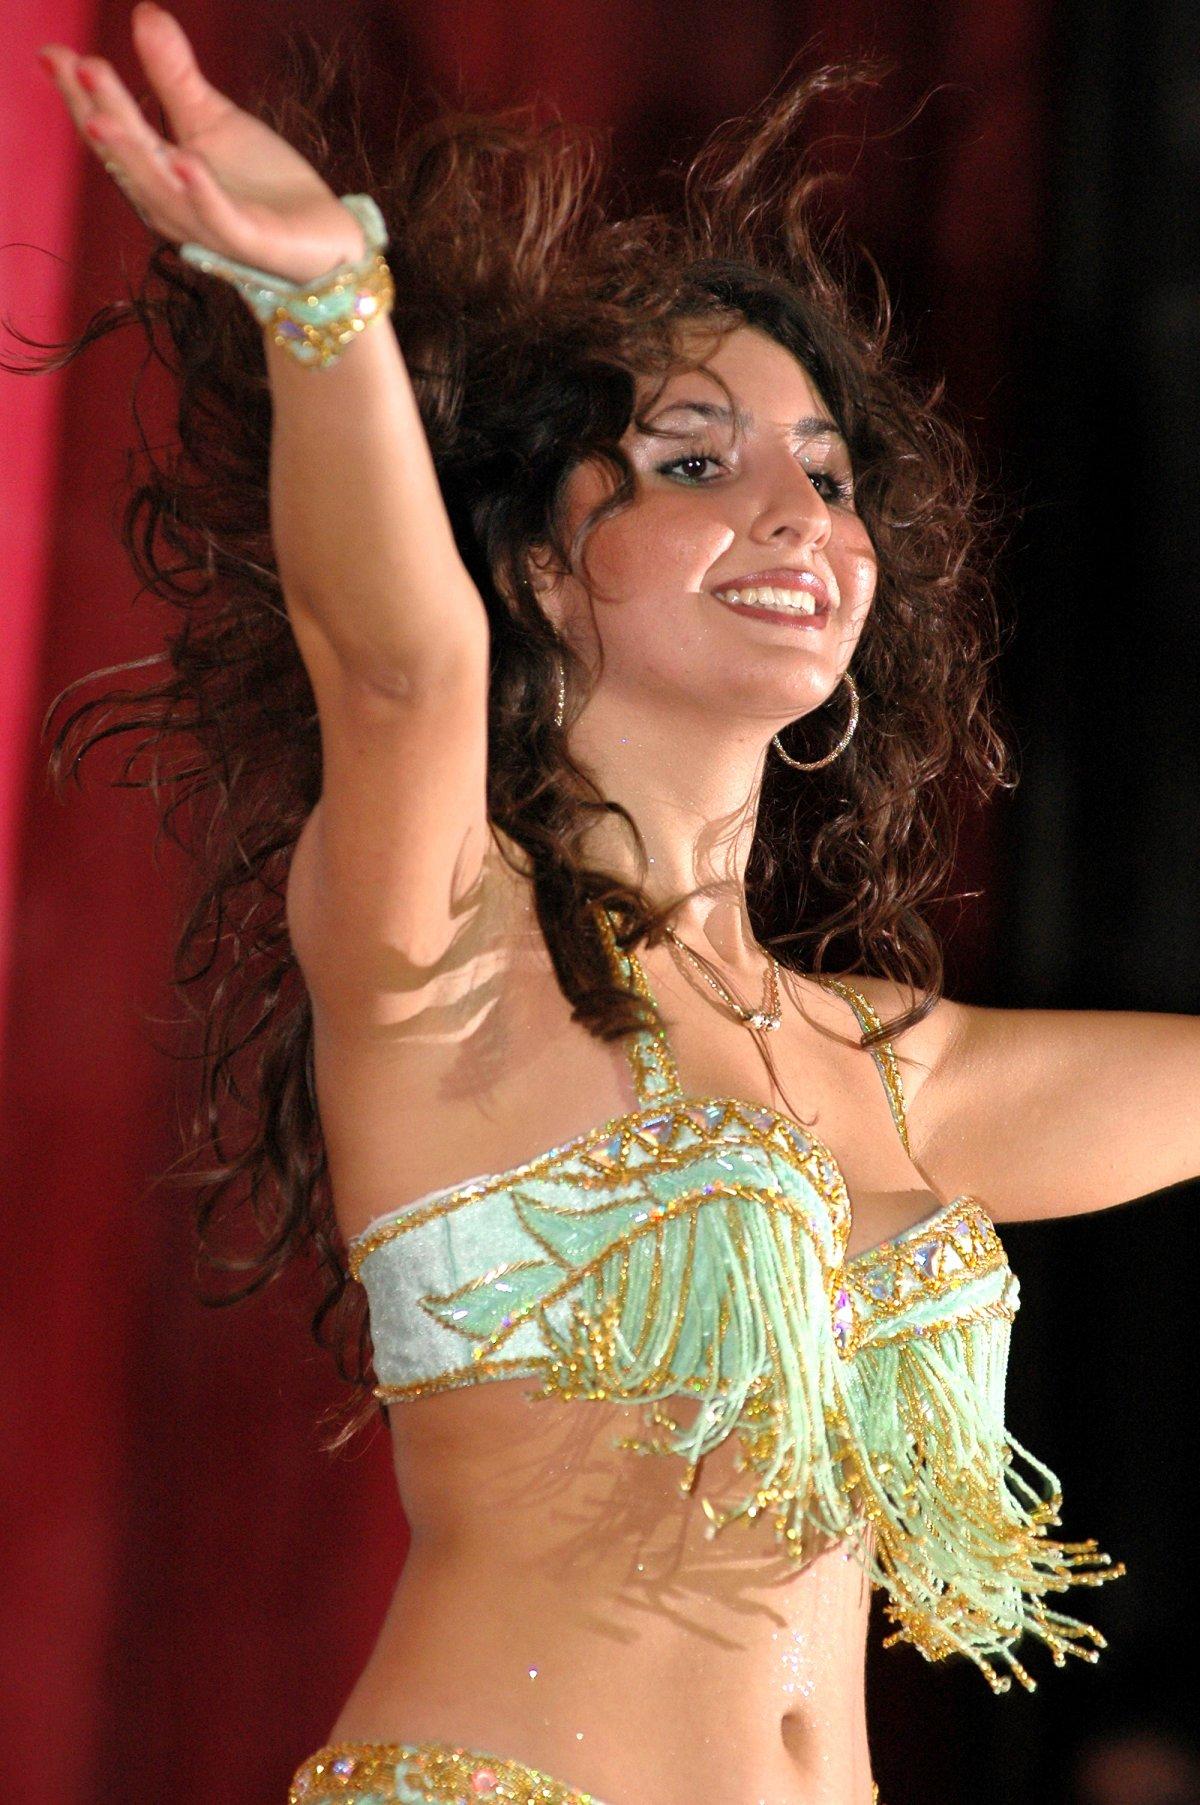 How to Belly Dance for Beginners